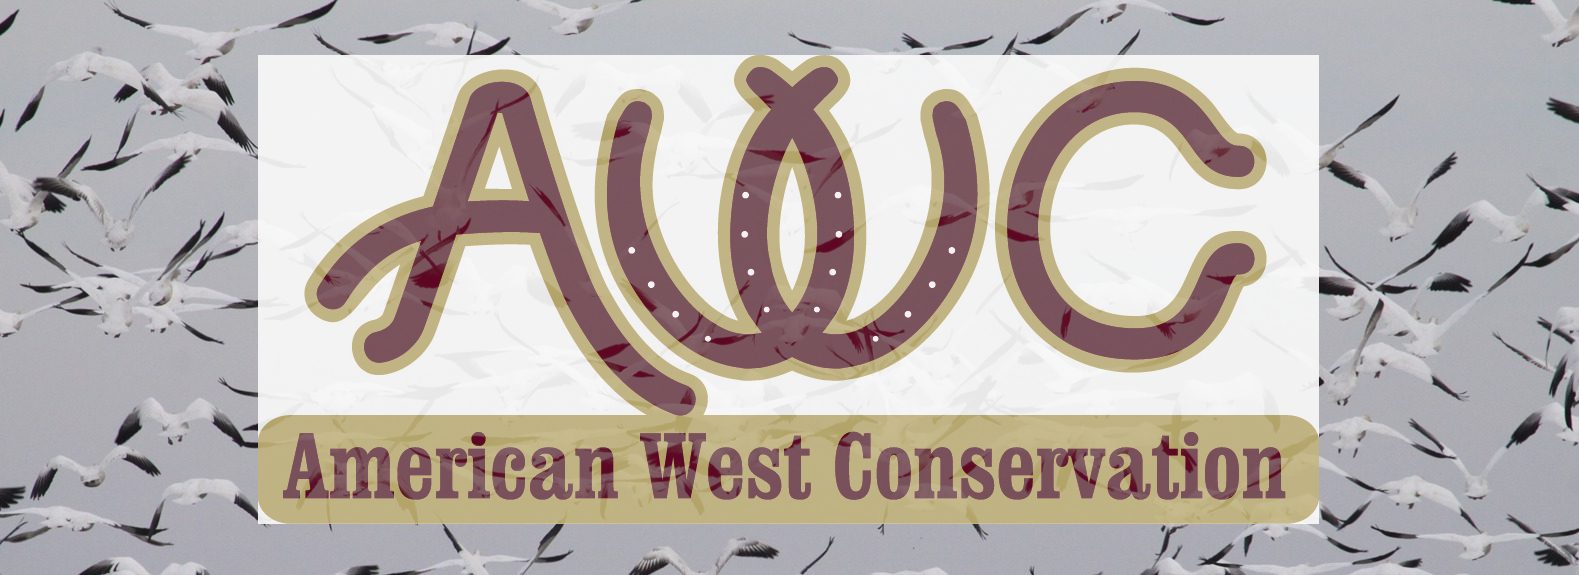 American West Conservation